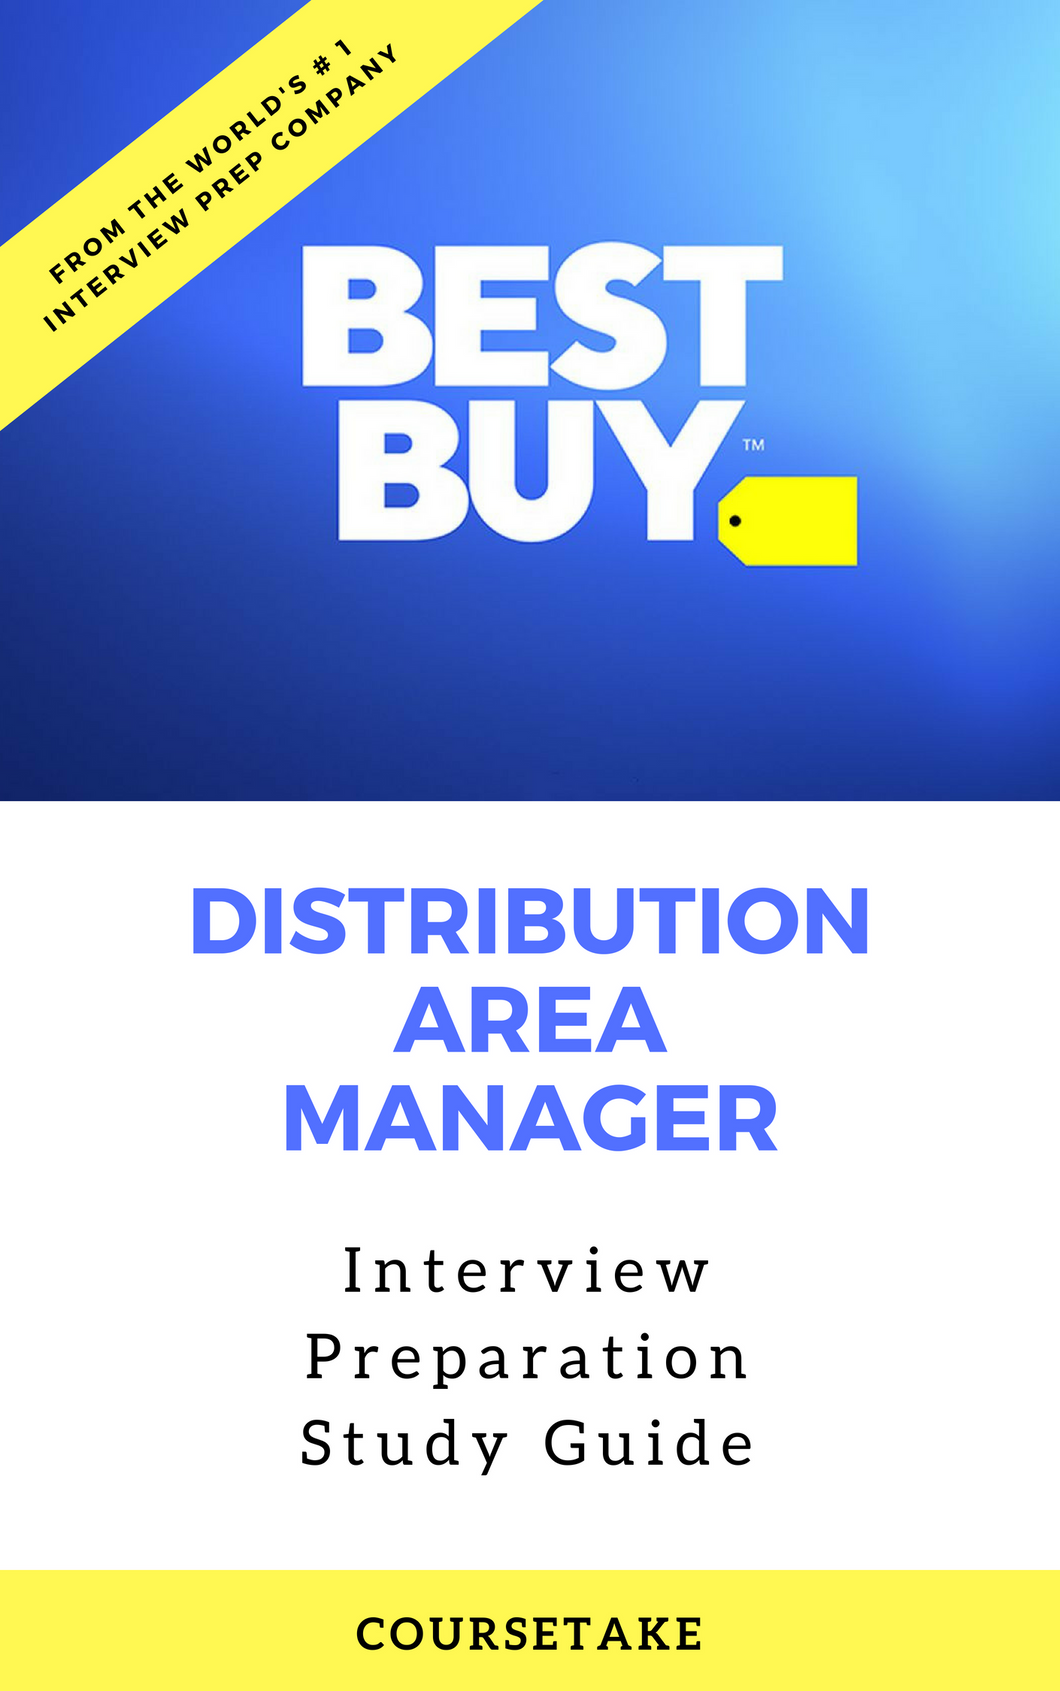 Best Buy Distribution Area Manager Interview Preparation Study Guide